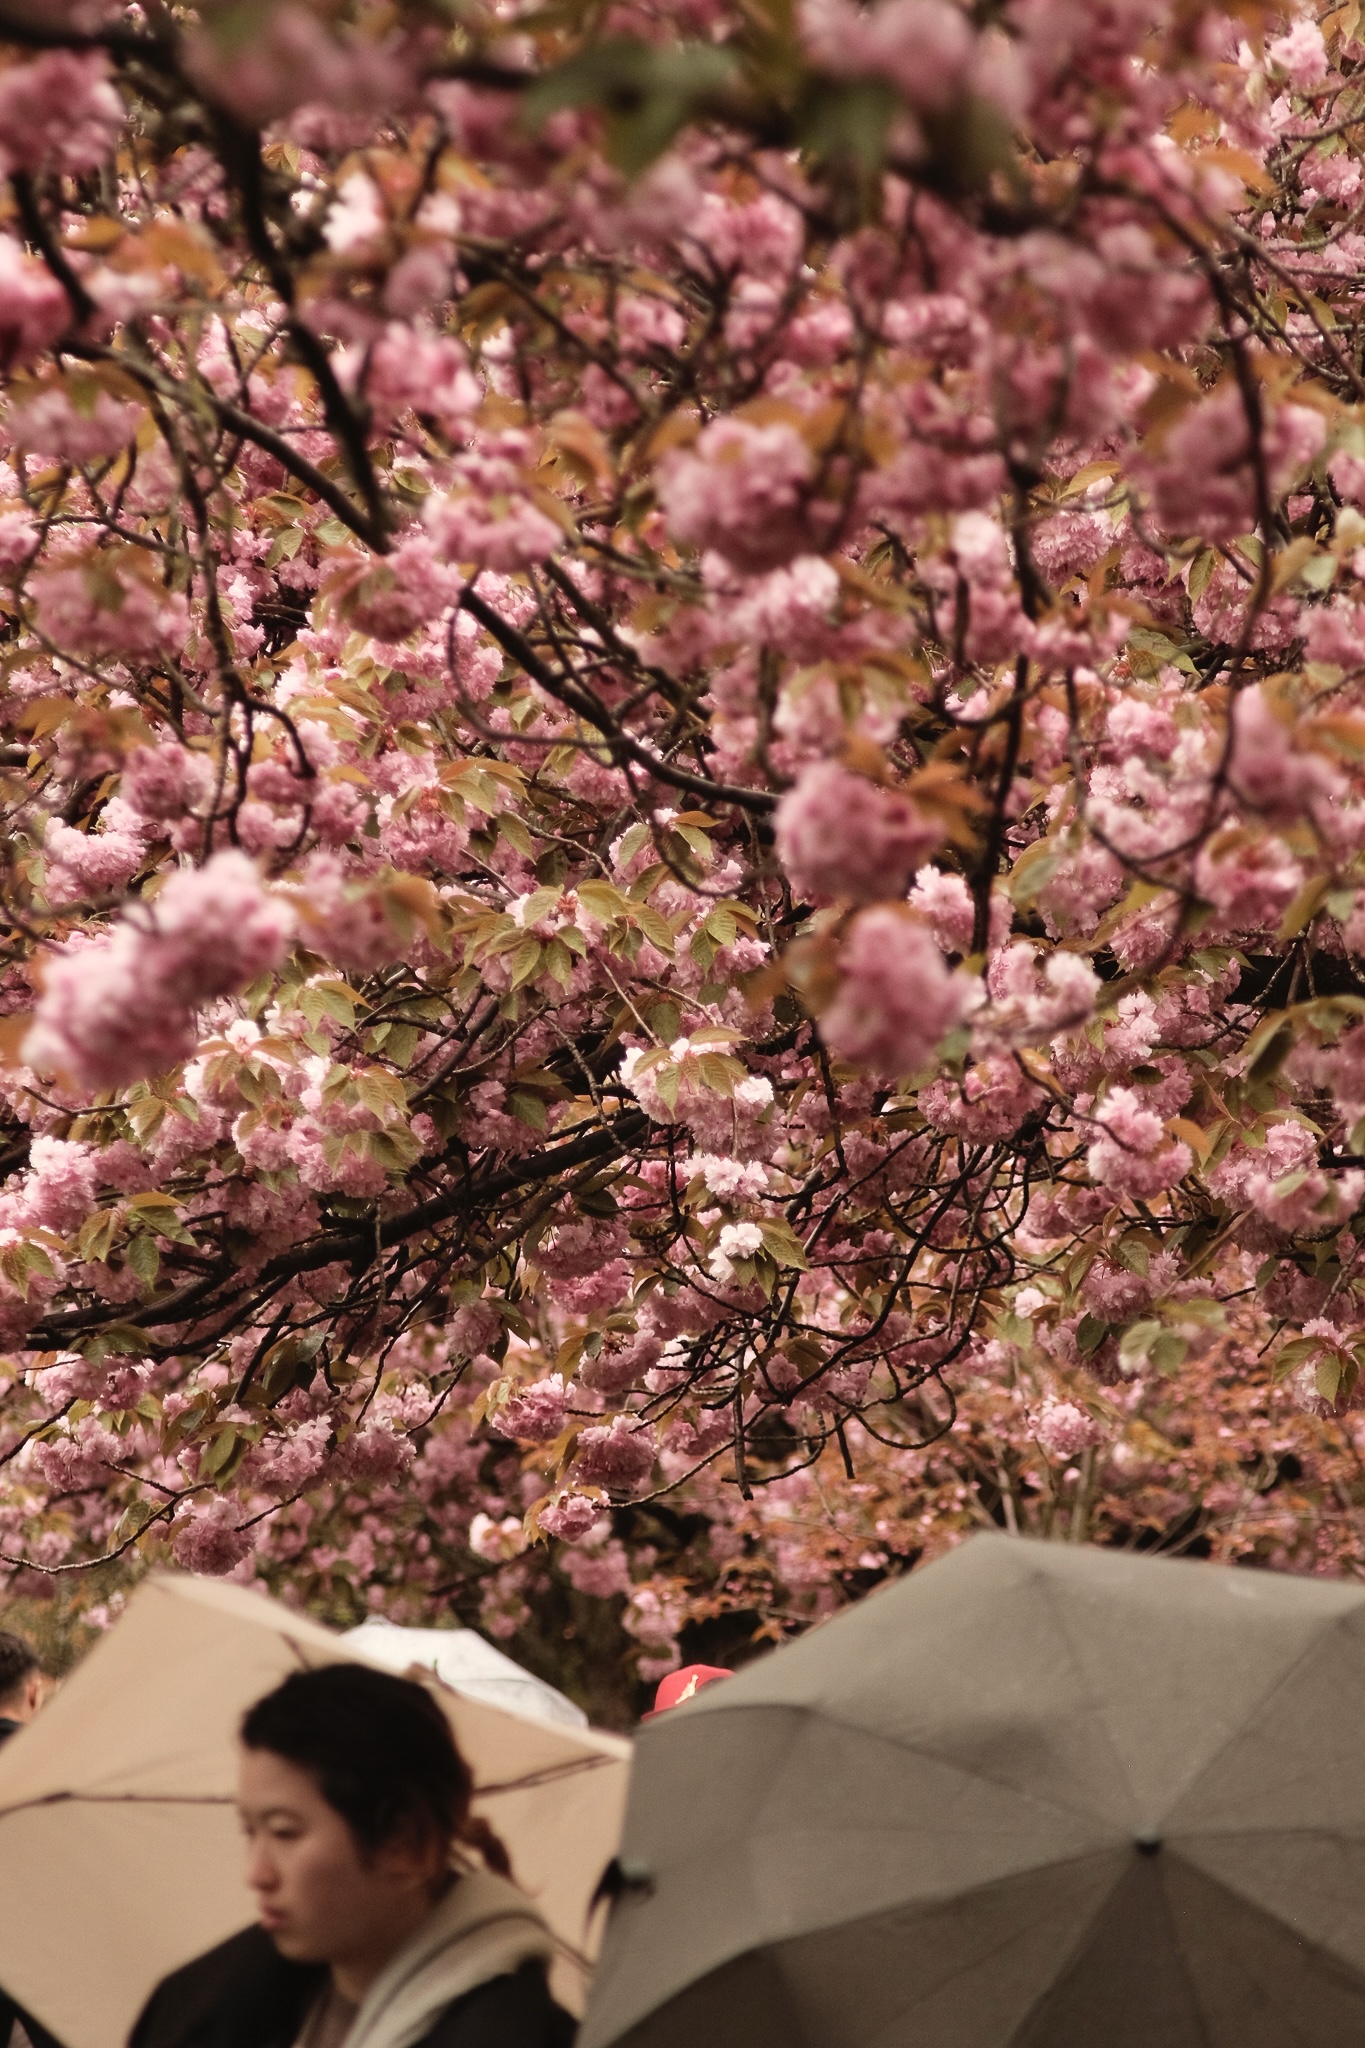 Cherry blossoms and people standing under umbrellas